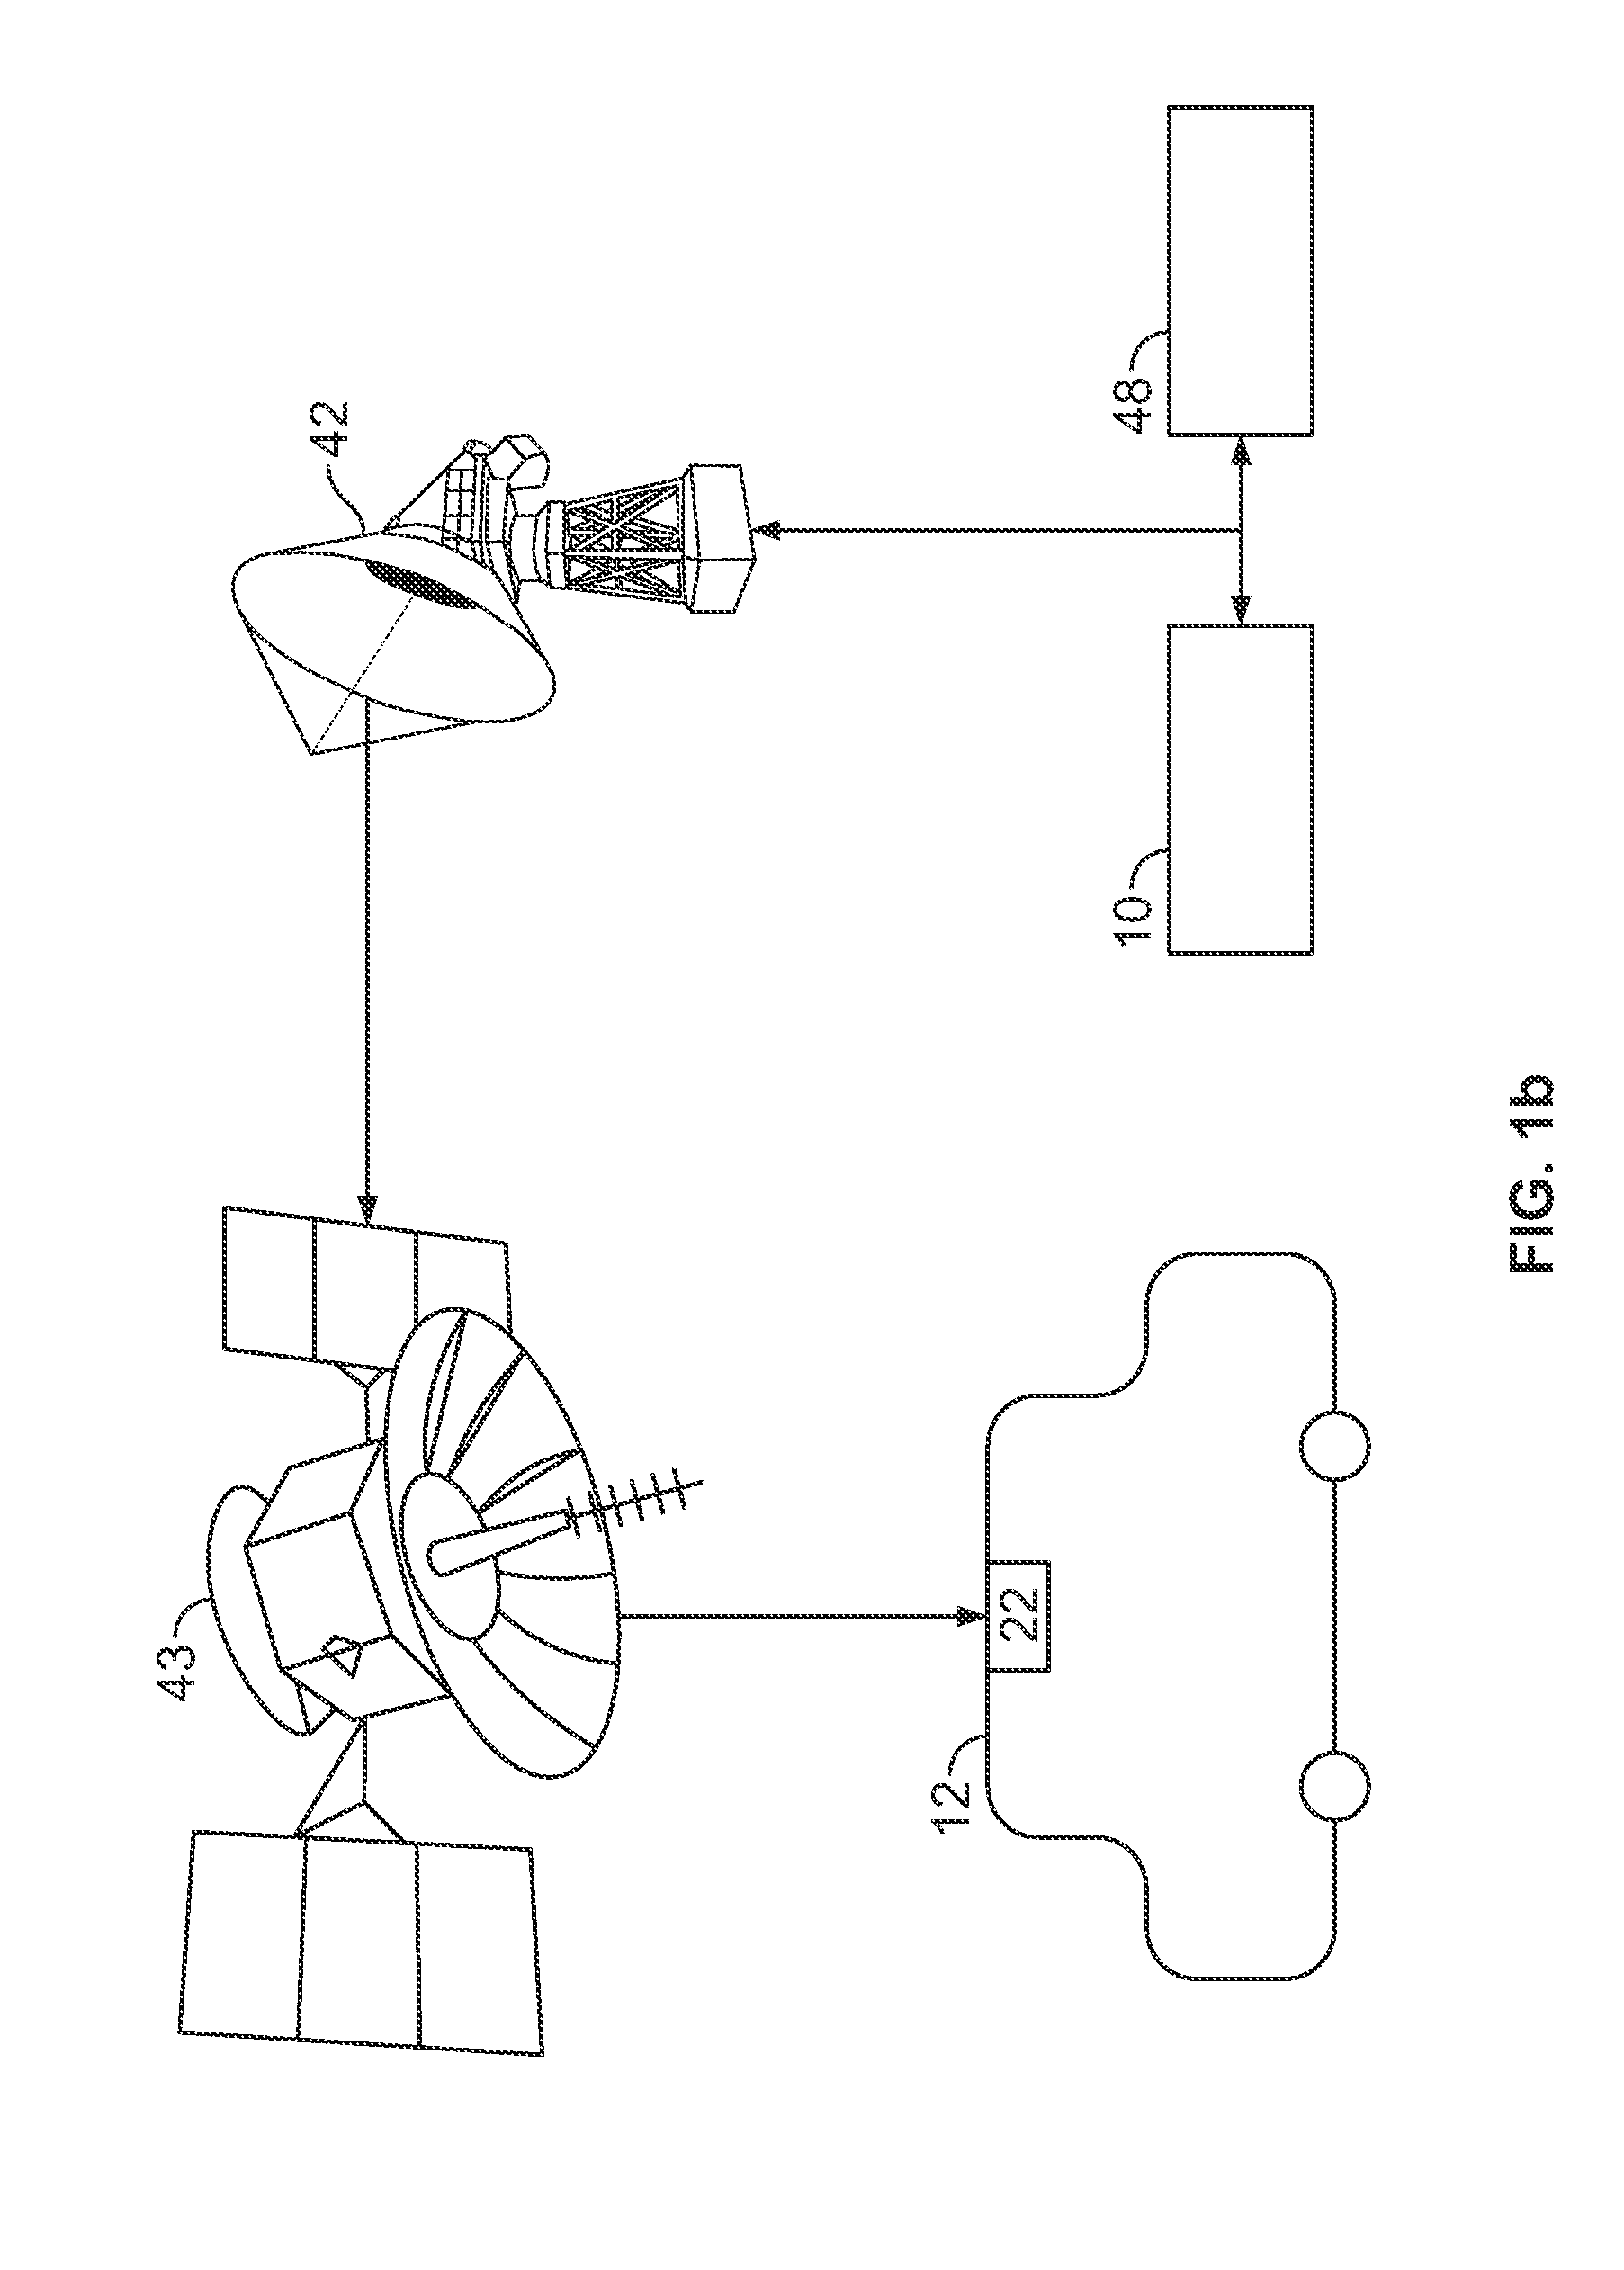 Method and system for making automated appointments